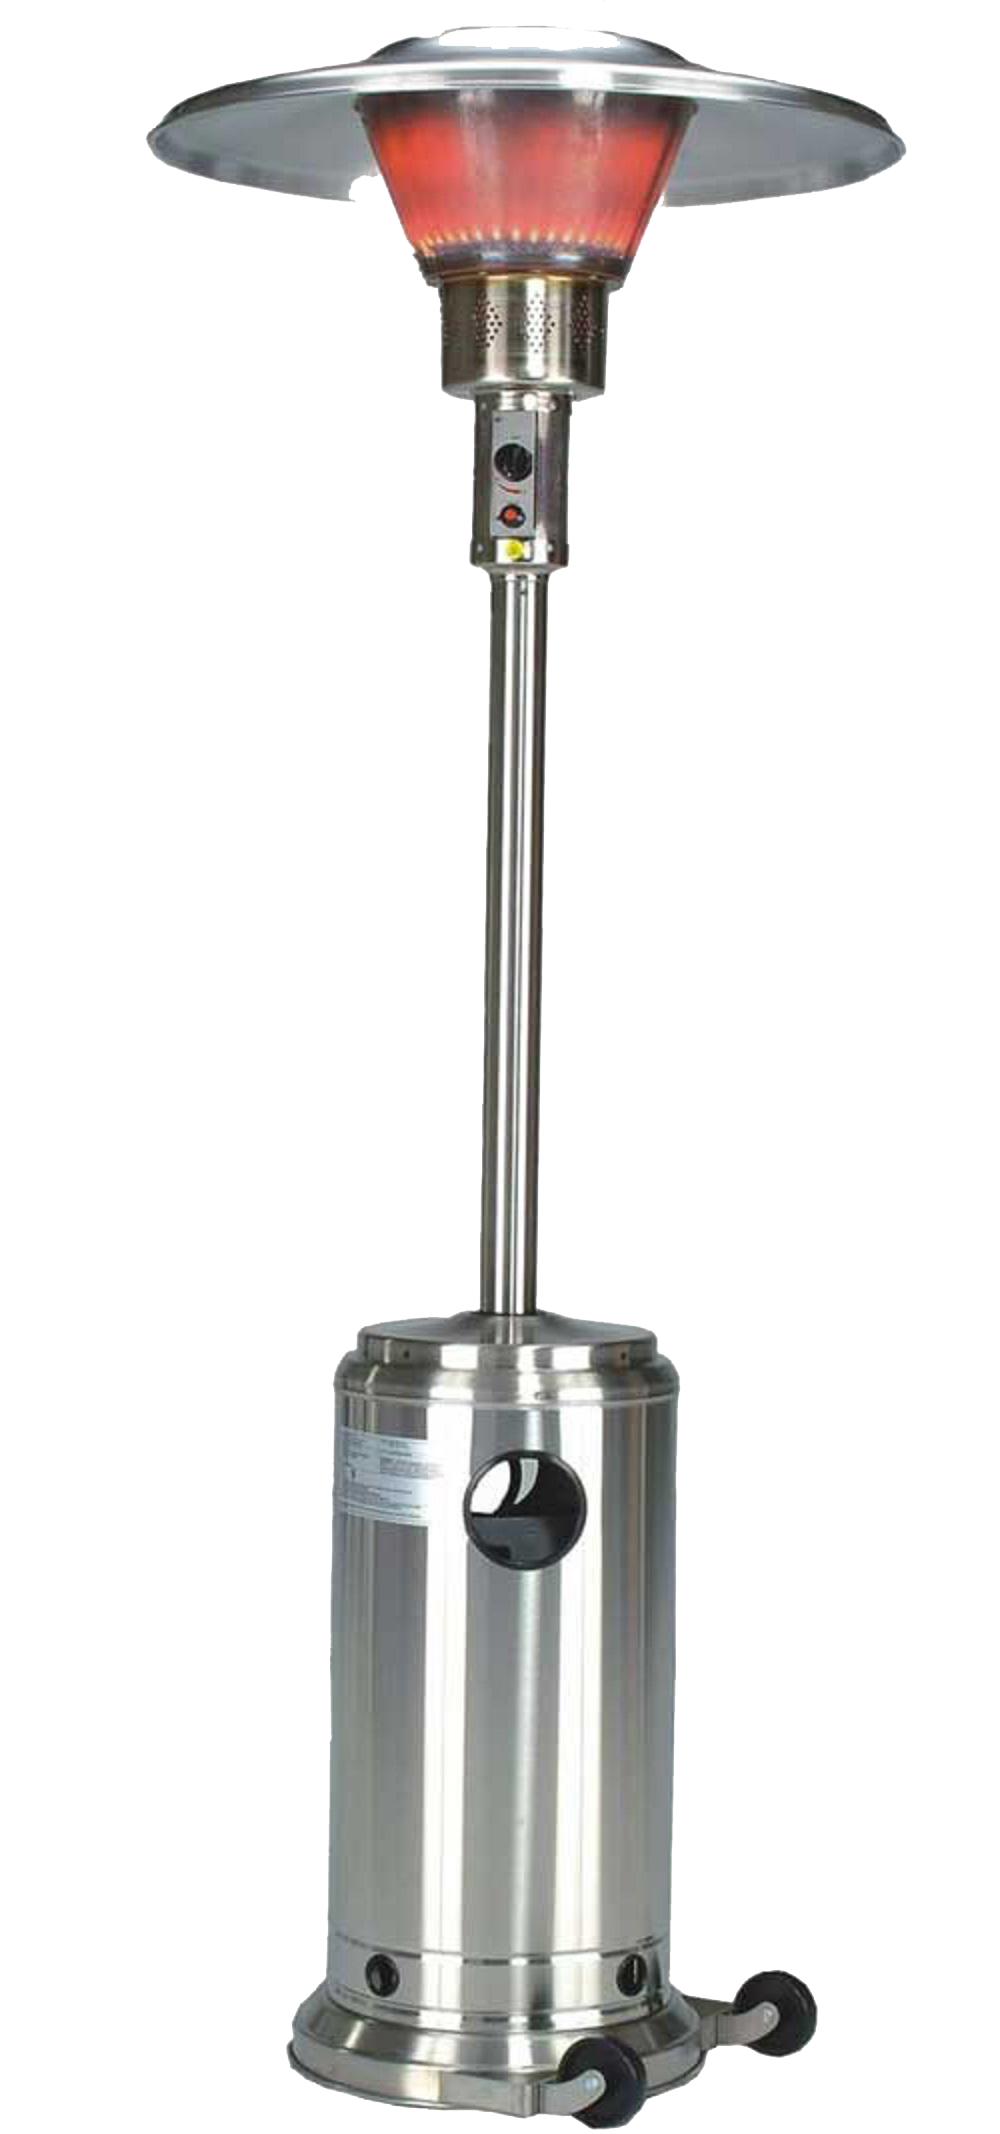 Hiland 90" Tall Commercial Patio Heater -Stainless Steel- BURN-2650-SS - Front View